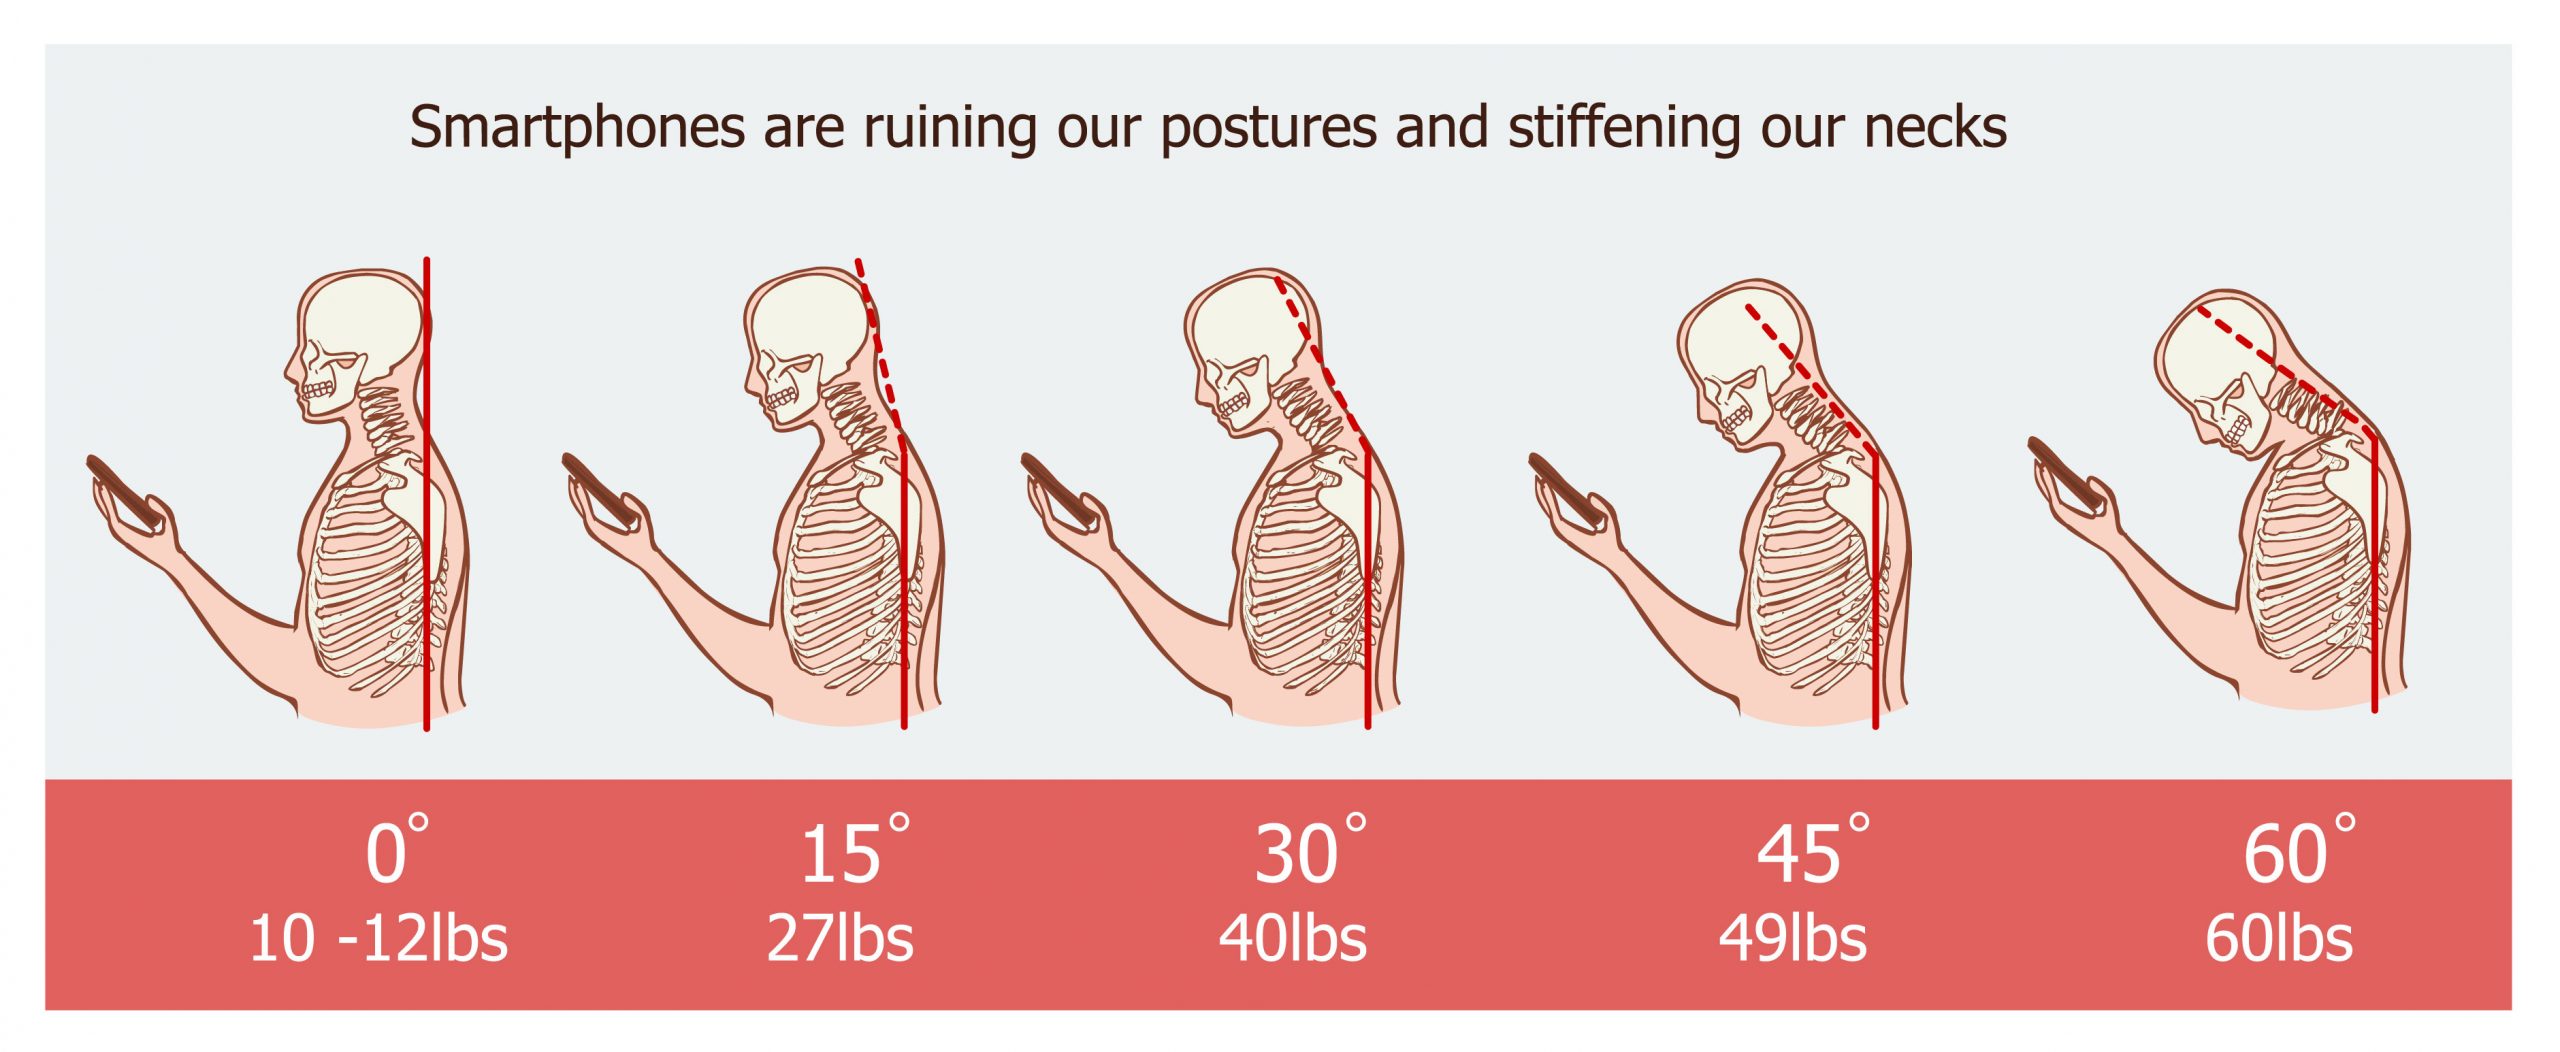 The pressure from cell phone use